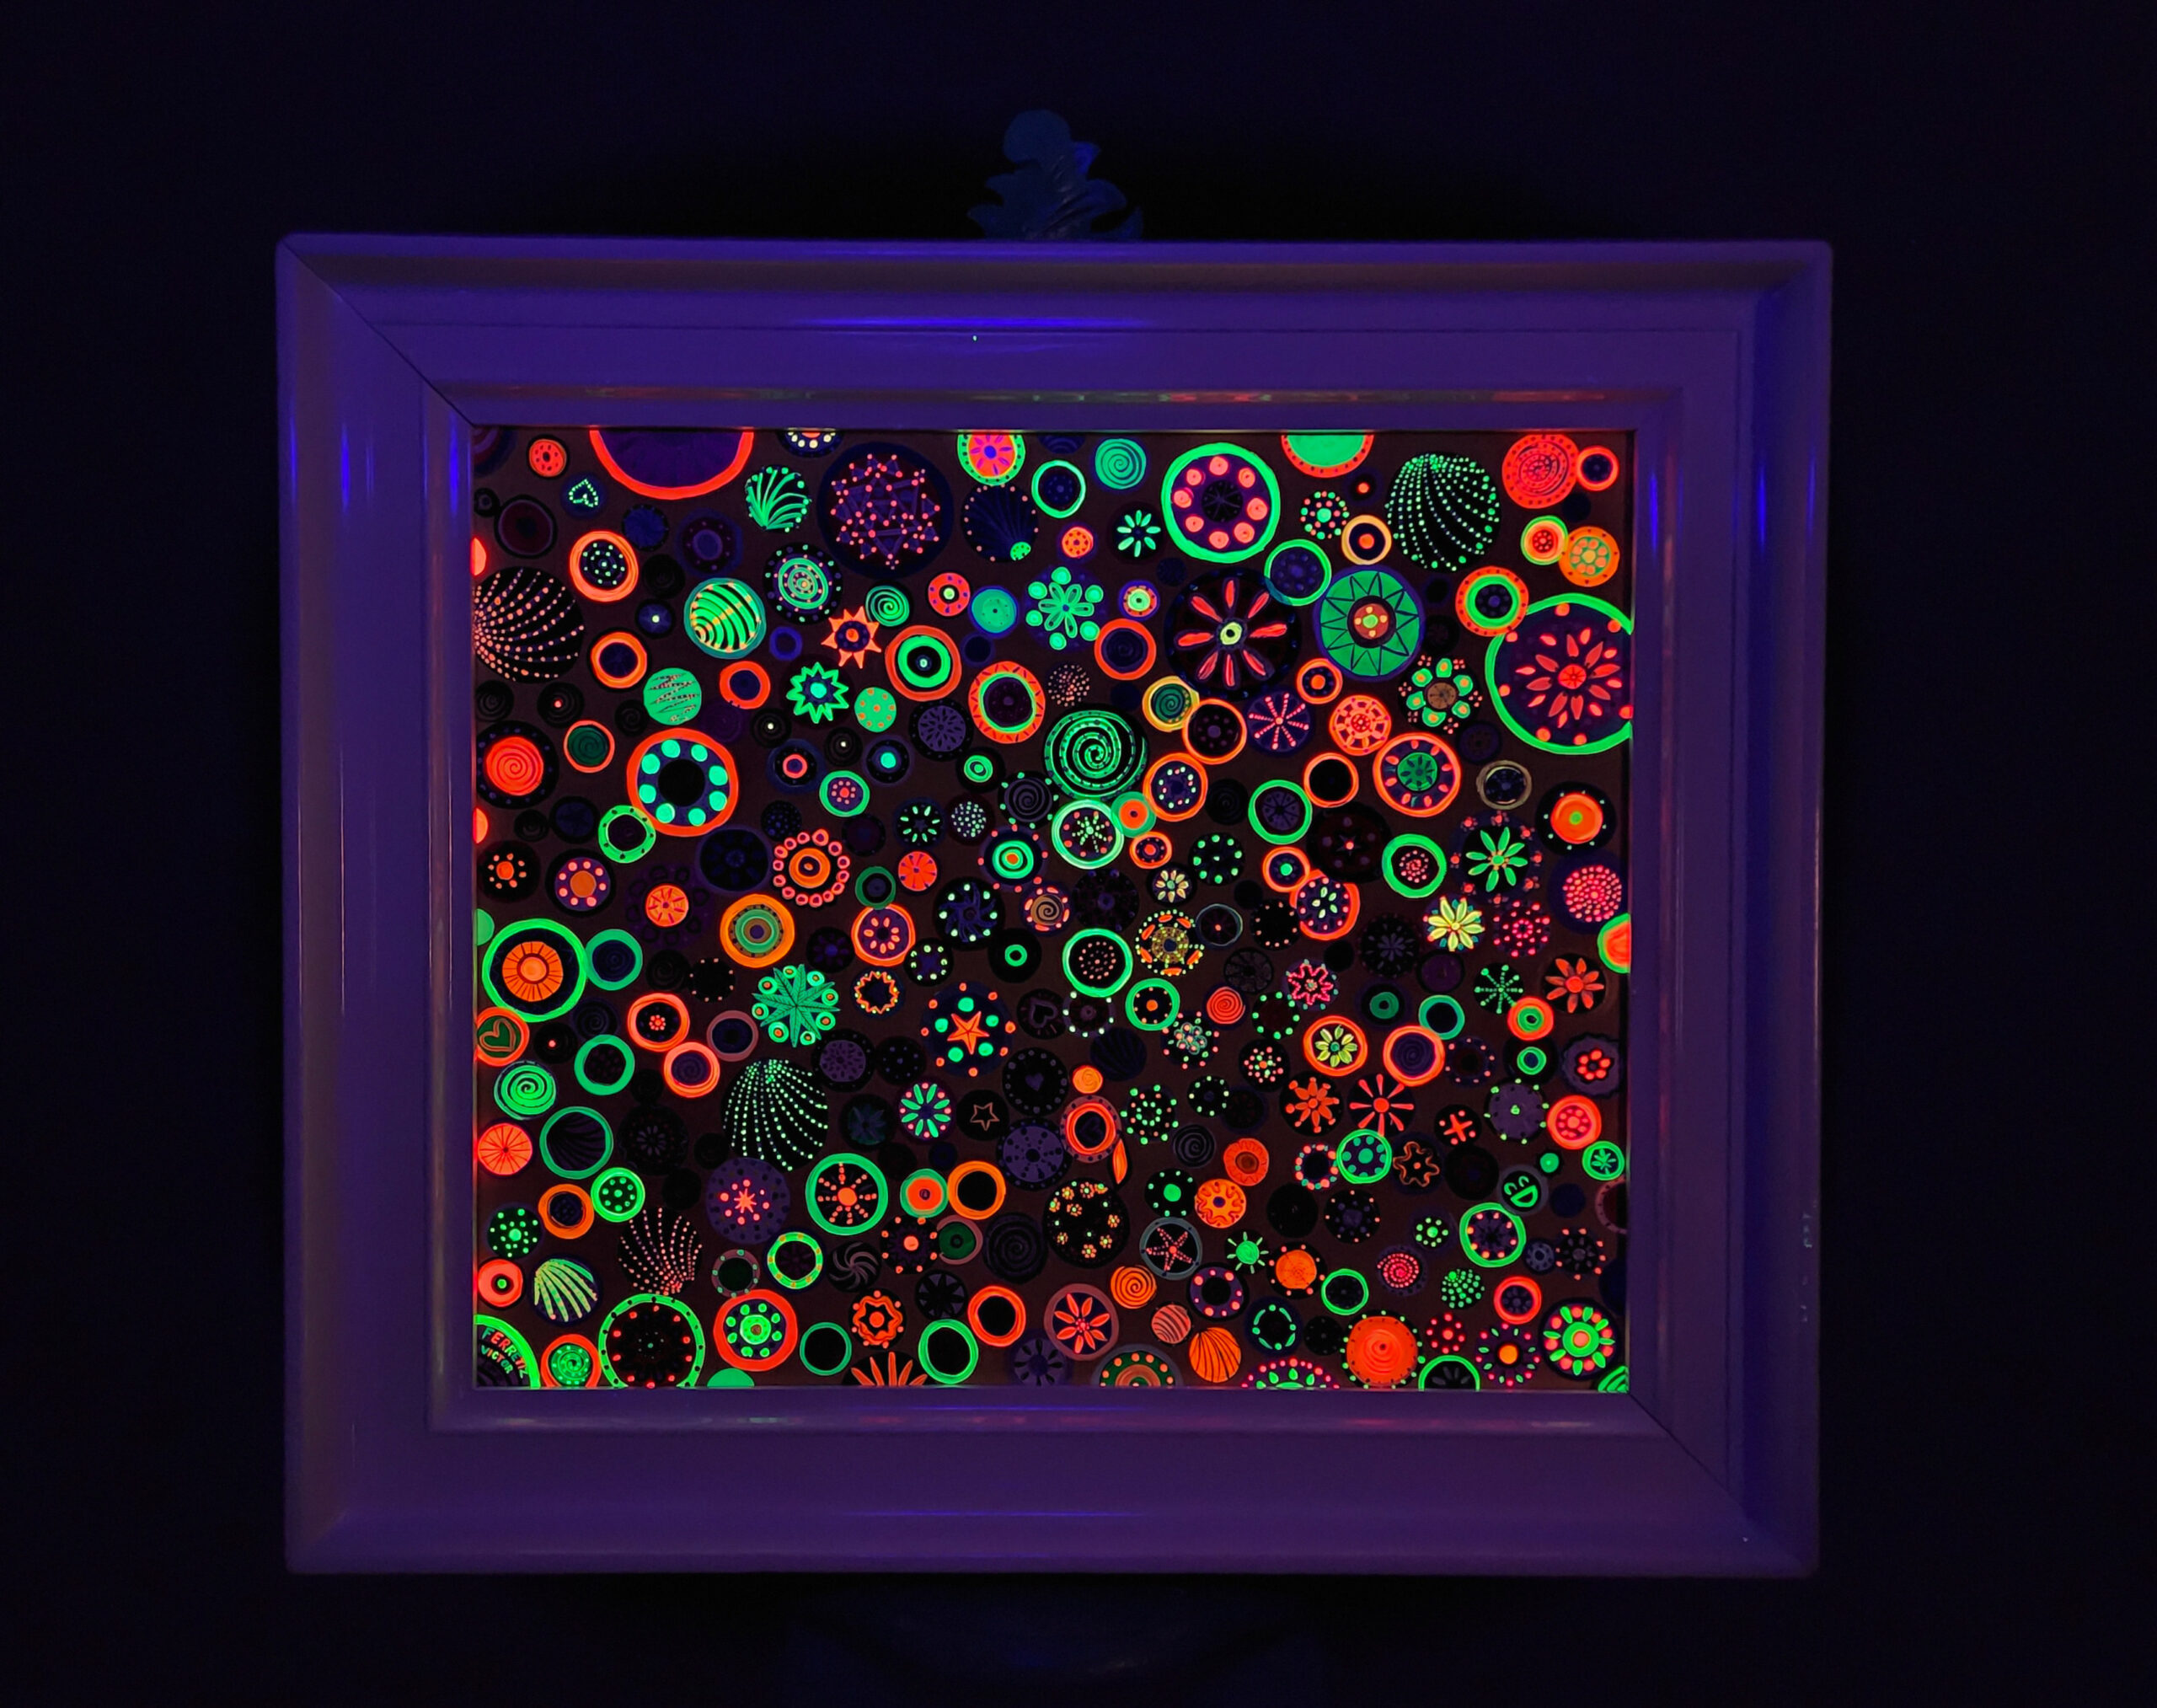 This artwork comes with an antique frame that was hand-painted. The creation of this original fluorescent artwork was inspired by the cosmos' magic and the astronomical design of the infinite universe. The planets, stars, and asteroids had always fascinated me since I began observing the milky way from my grandmother's garden in the night when I was in Mexico. The skies in small towns in Mexico are clearer because there is not much pollution that can prevent us from seeing these stellar scenes of the nature of the universe. The combination of relational art is an interaction of the human being and the art object, such as this fluorescent painting that glows in the dark with UV light. I painted many unique designs in each circle that brings a lot of happiness and color to our lives, well, even more joy than what is already in our hearts.